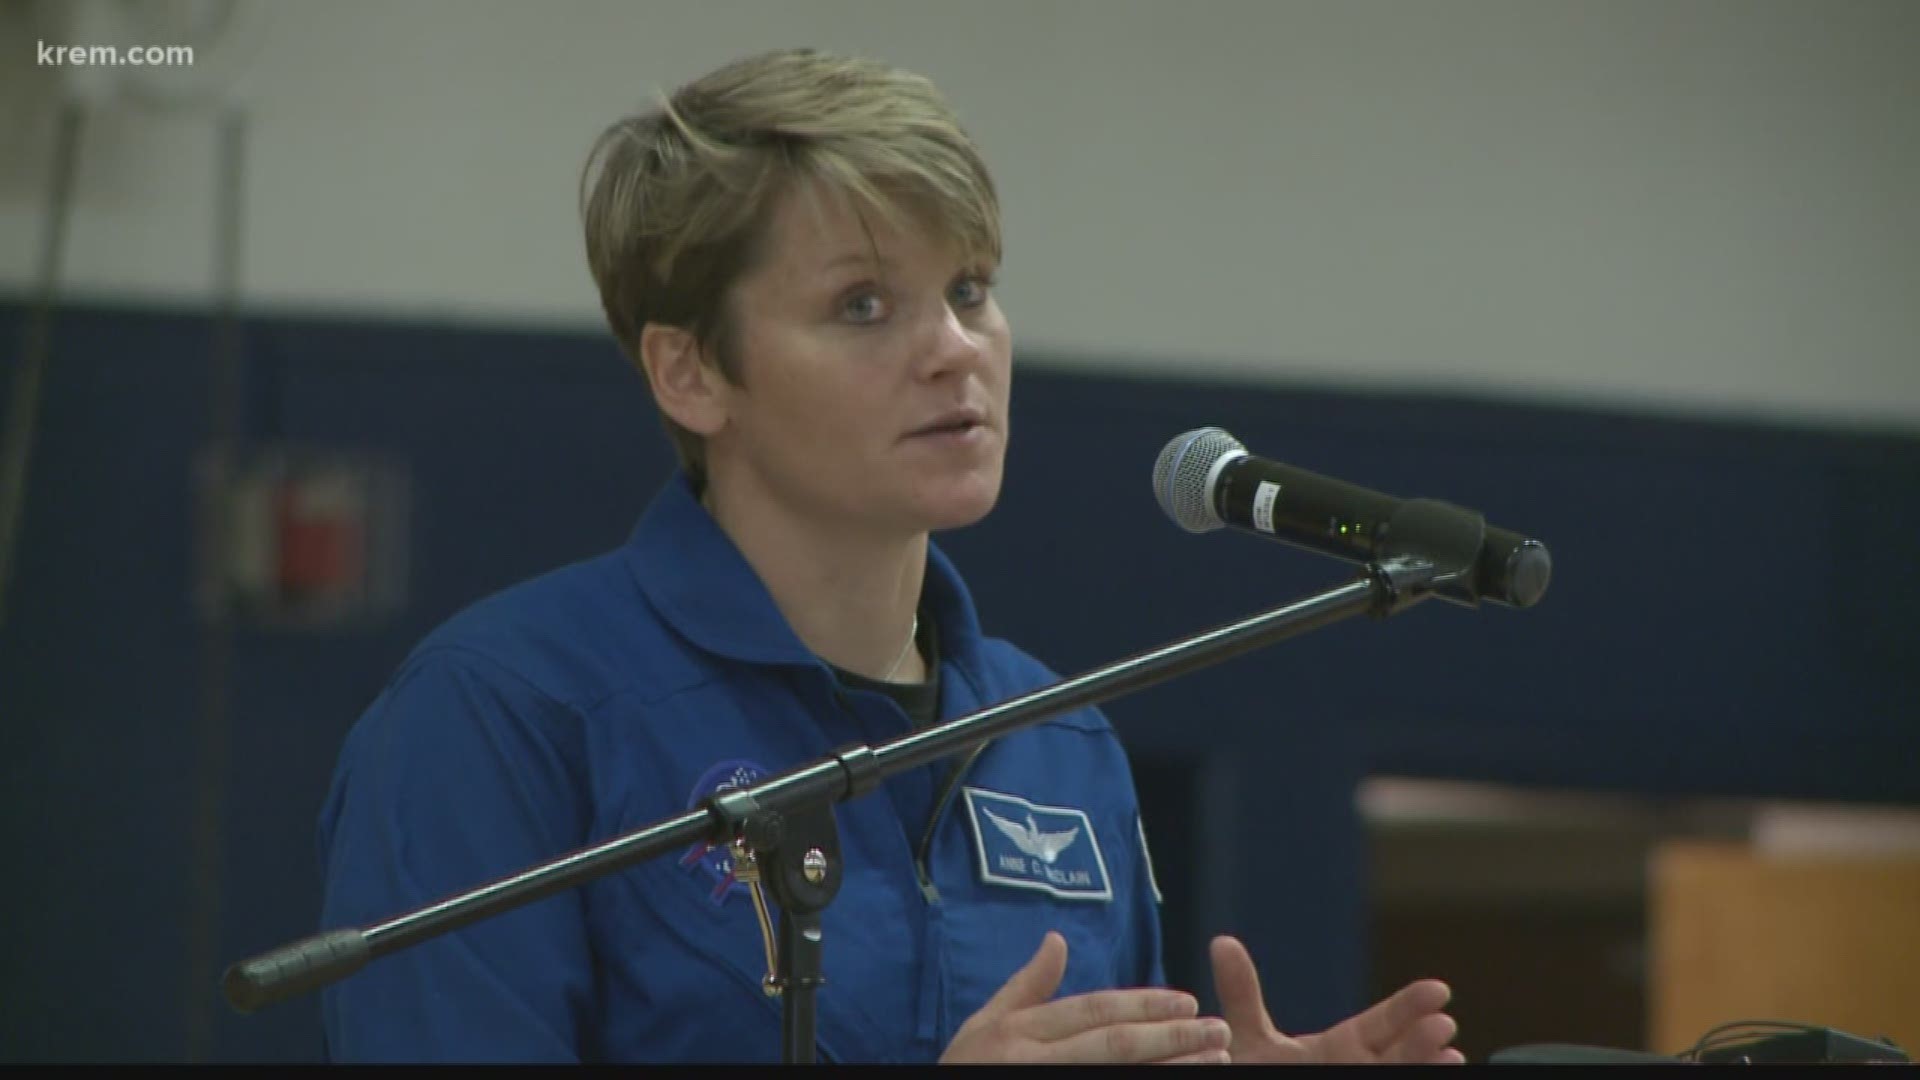 She has a Masters Degree in in aerospace engineering and is one of eight accepted into NASA's astronaut class.